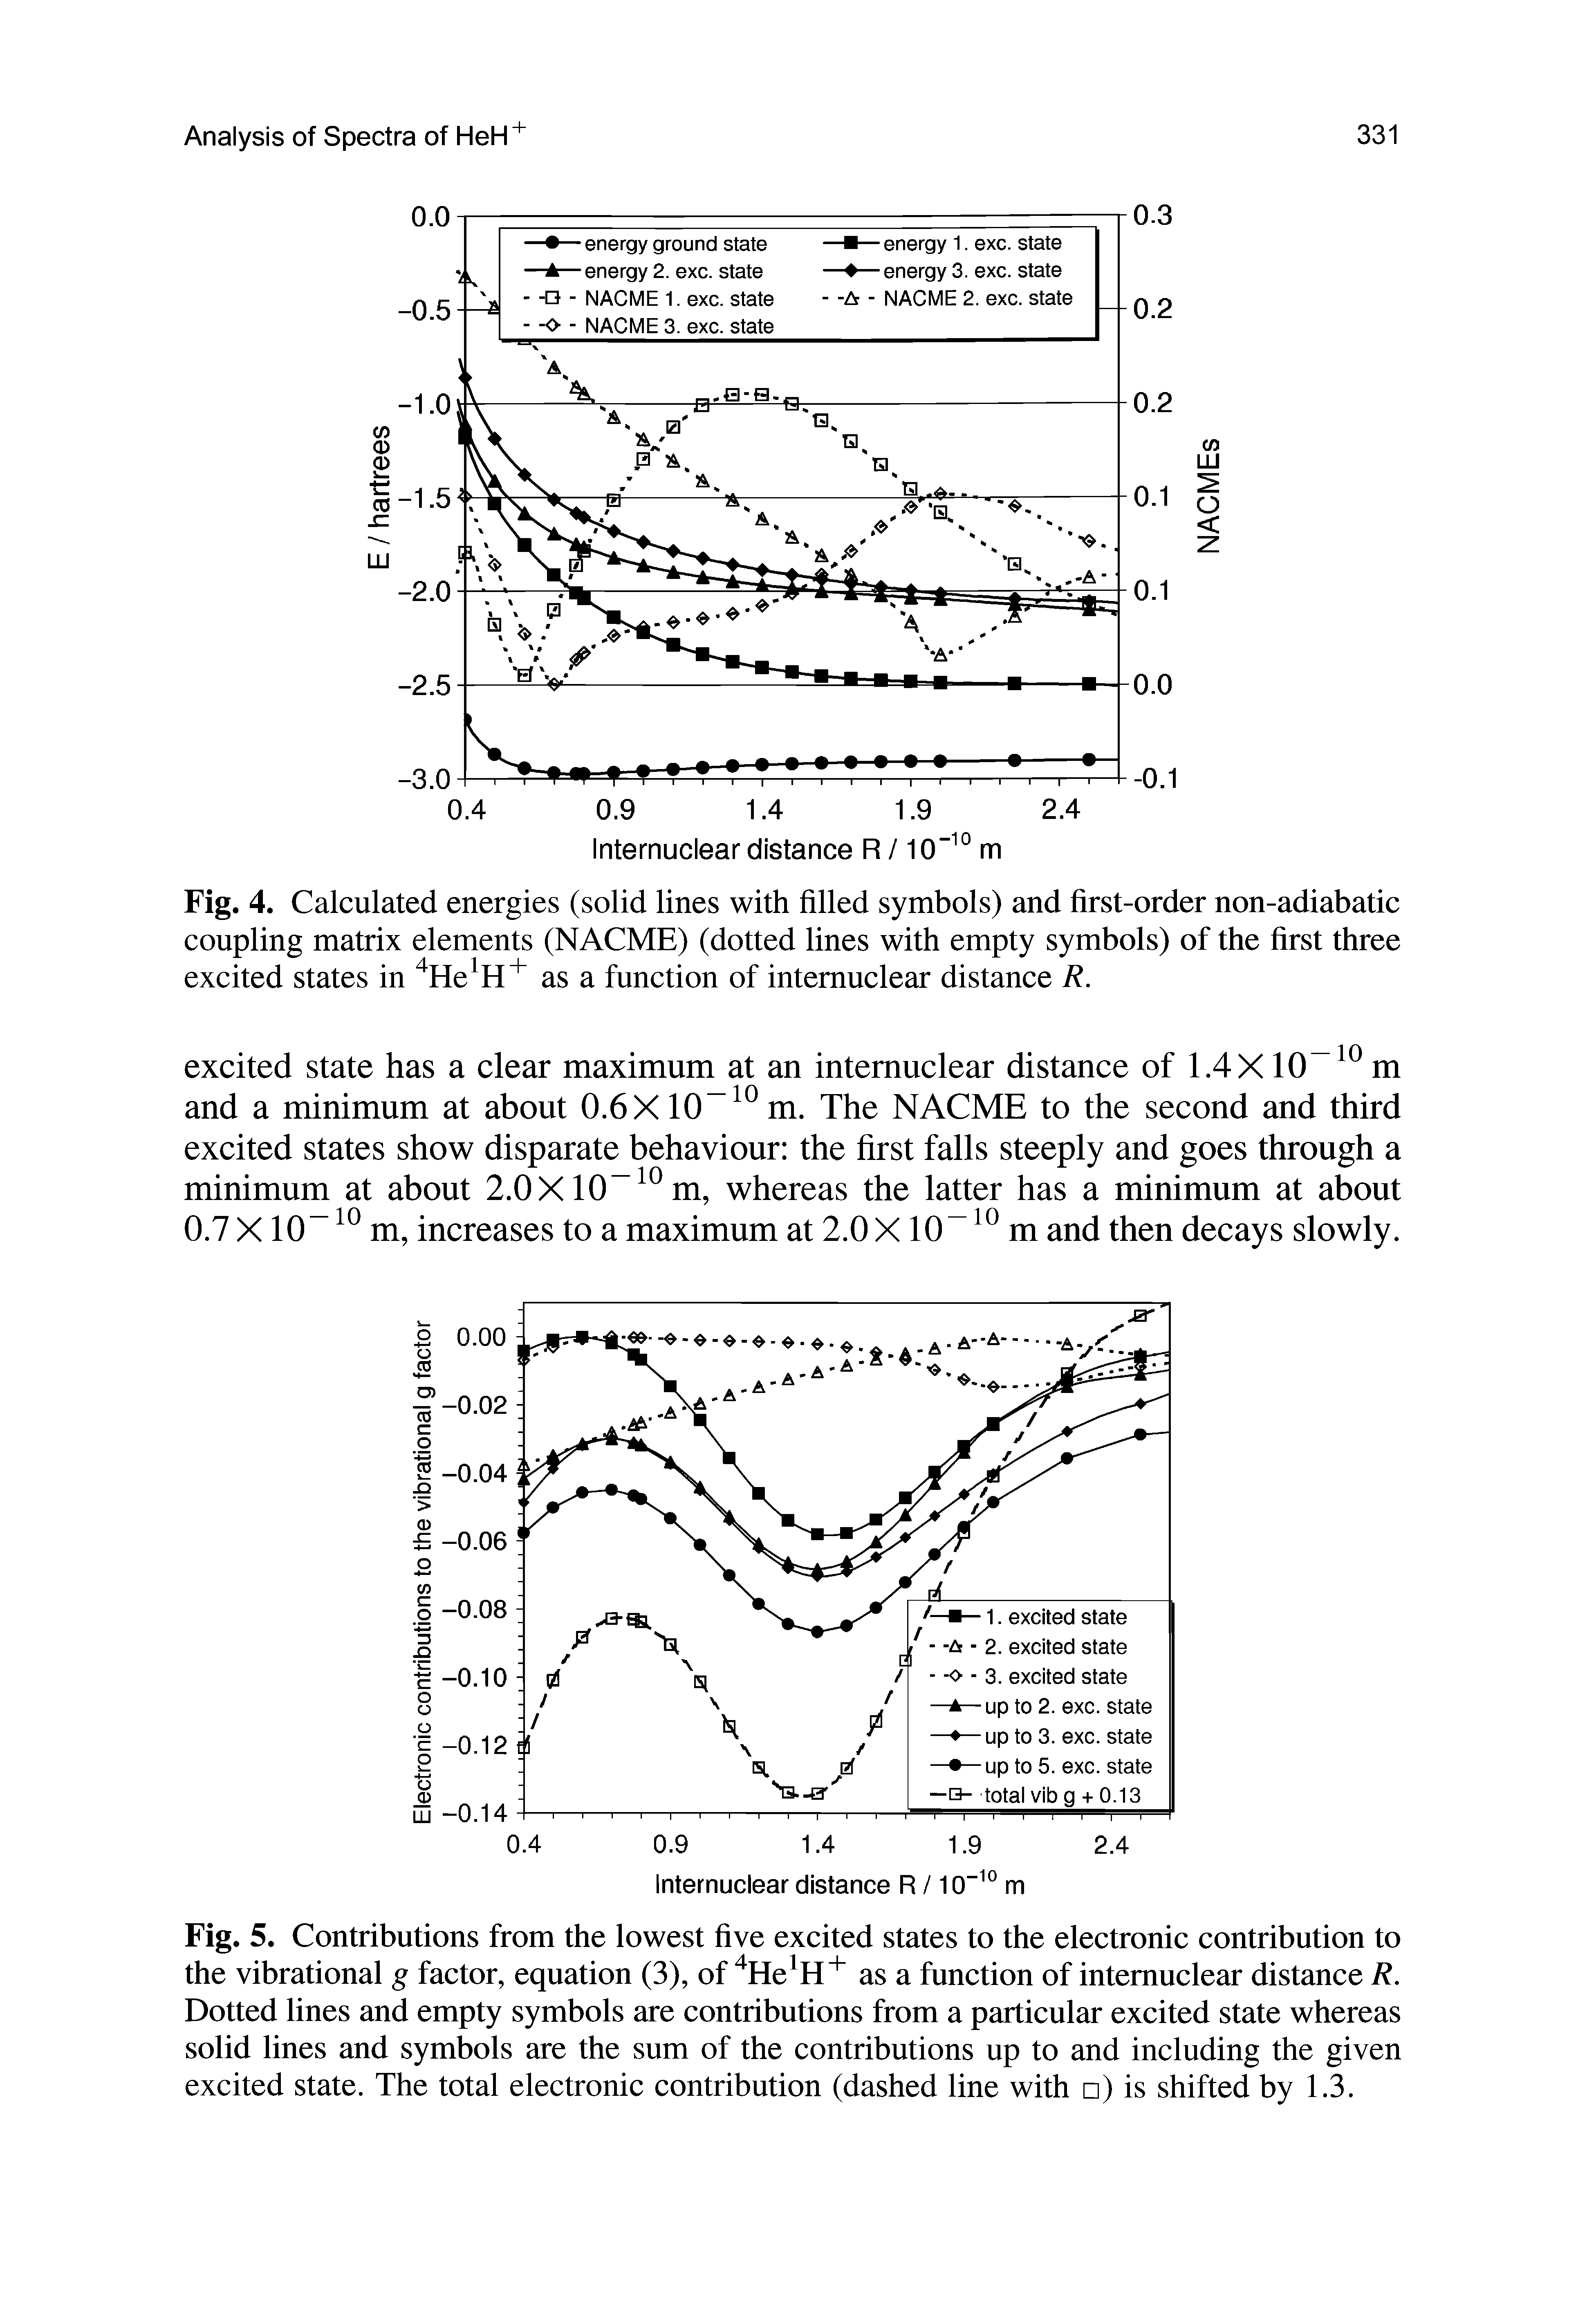 Fig. 4. Calculated energies (solid lines with filled symbols) and first-order non-adiabatic coupling matrix elements (NACME) (dotted lines with empty symbols) of the first three excited states in as a function of internuclear distance R.